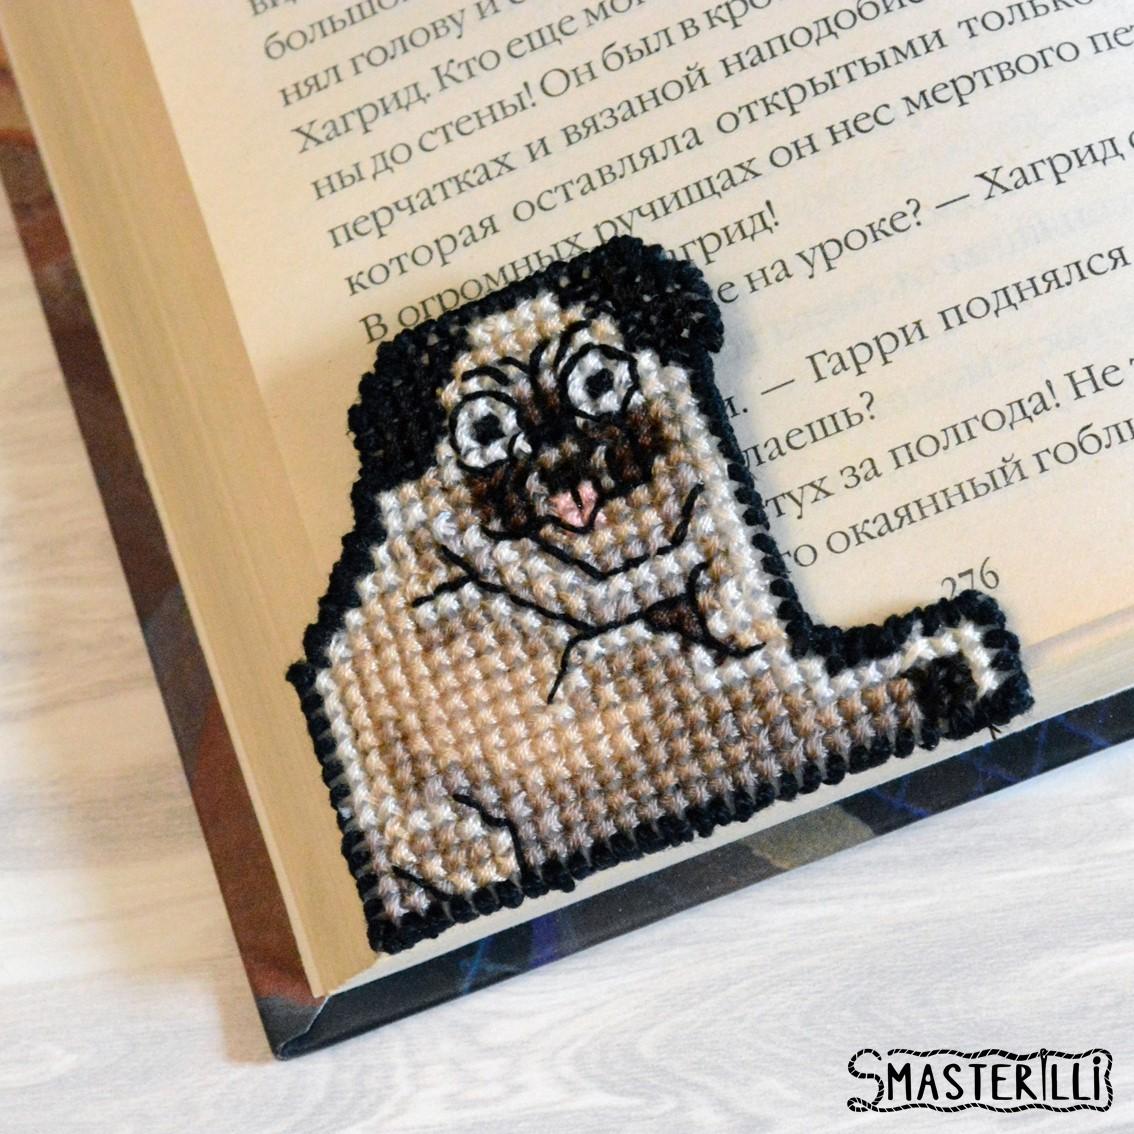 Fat pug corner cross stitch bookmark: pattern and tutorial for plastic canvas PDF by Smasterilli. Digital cross stitch pattern for instant download. Plastic Canvas Project. Book Lover's Craft